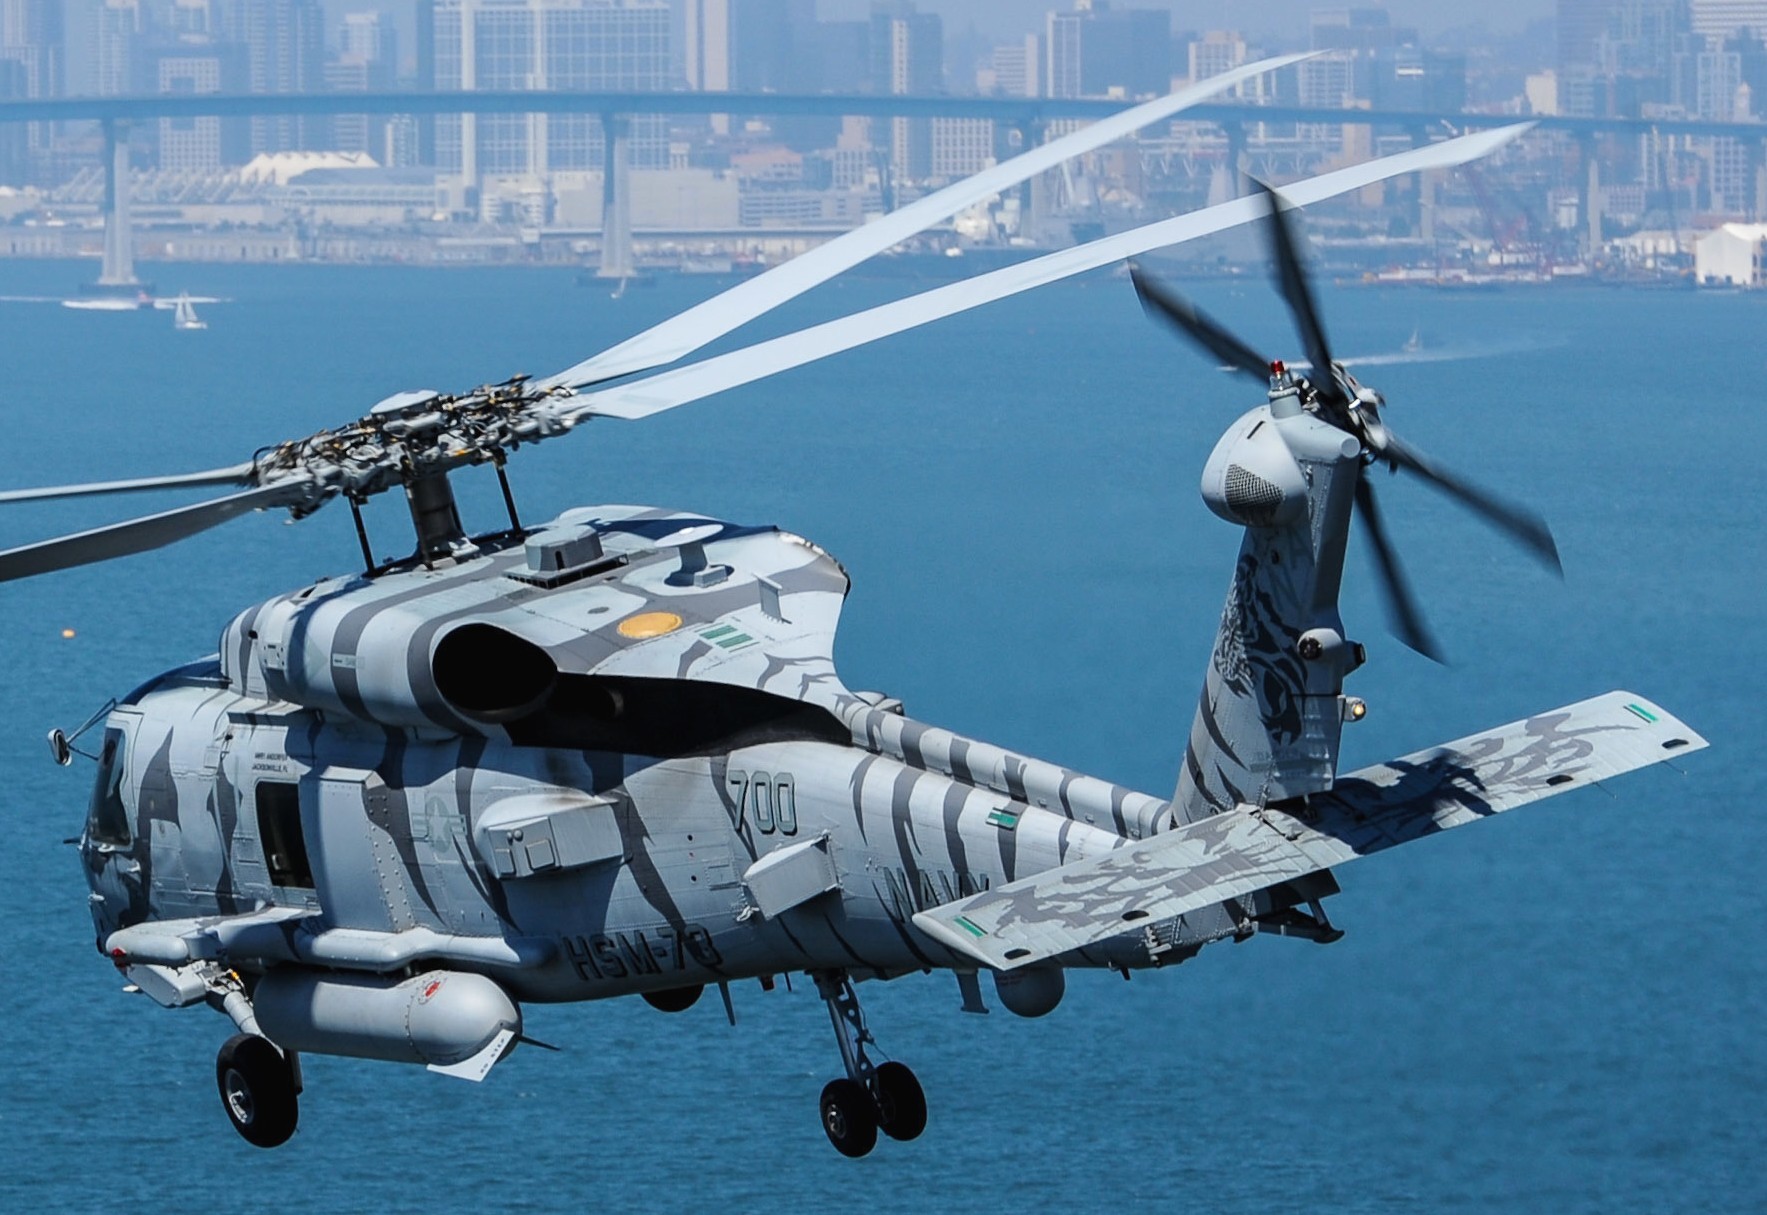 hsm-73 battlecats helicopter maritime strike squadron us navy mh-60r seahawk 2016 40